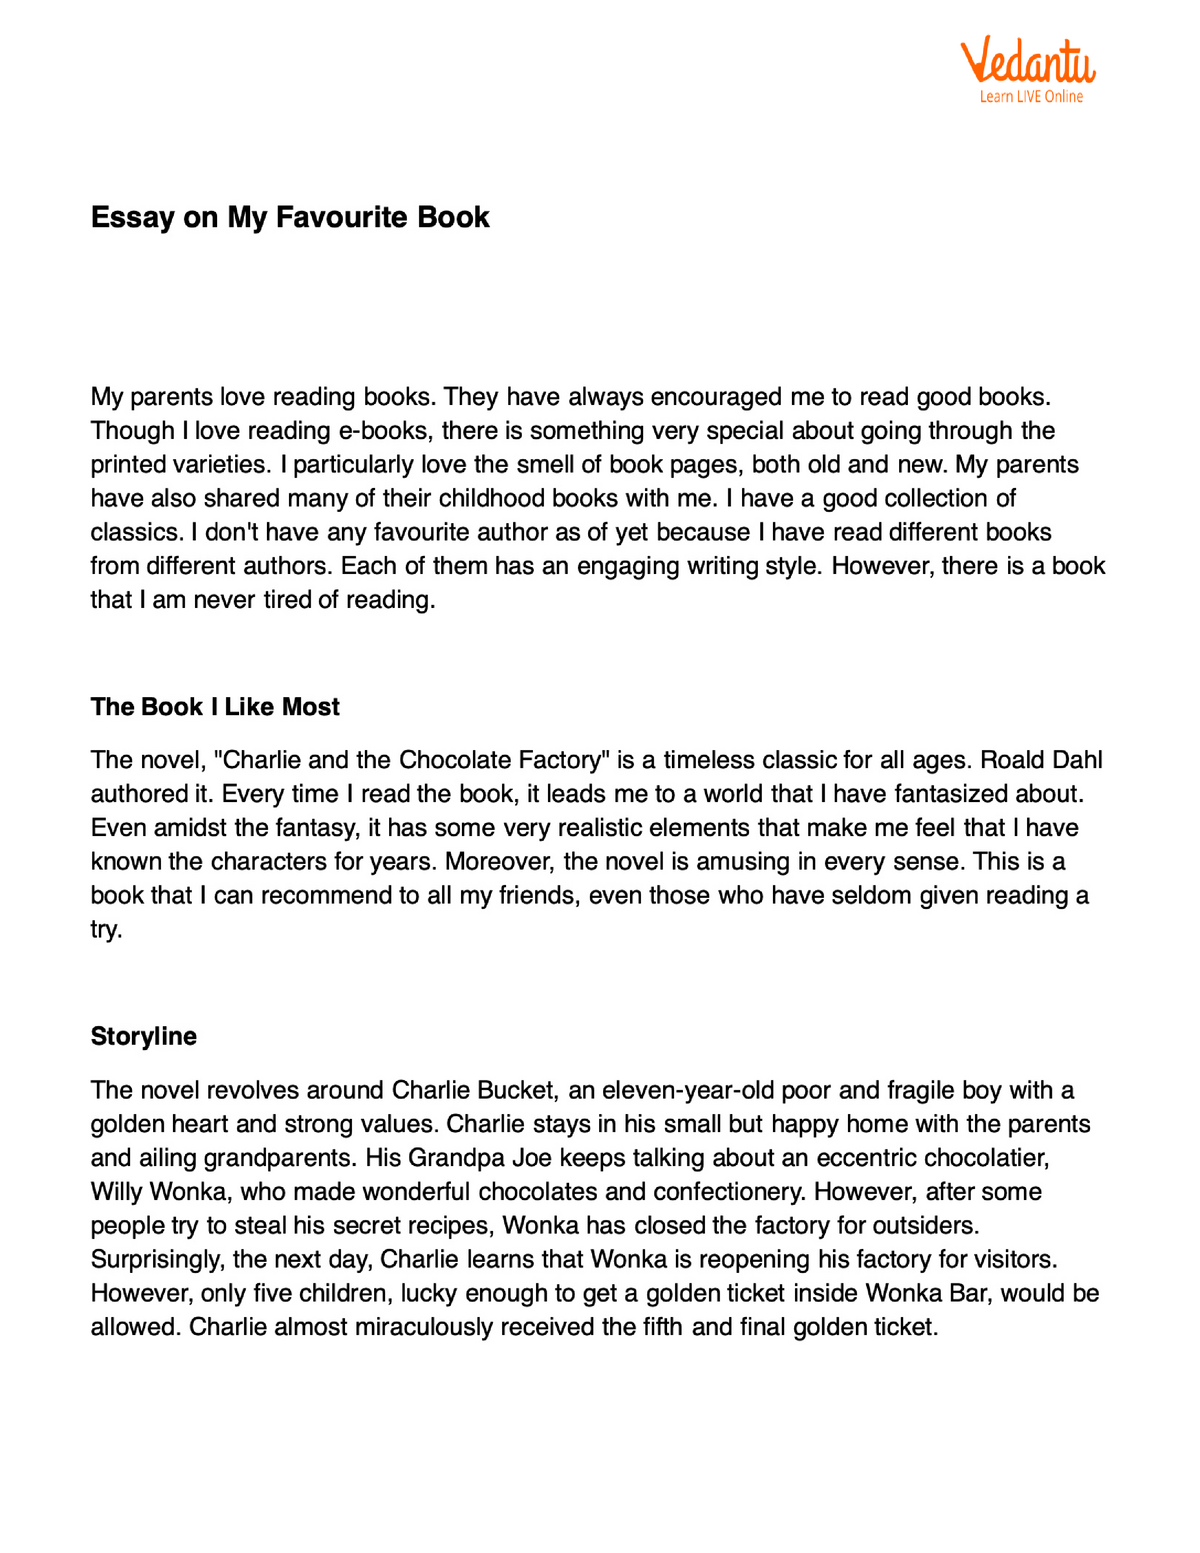 250 words essay on my favourite book